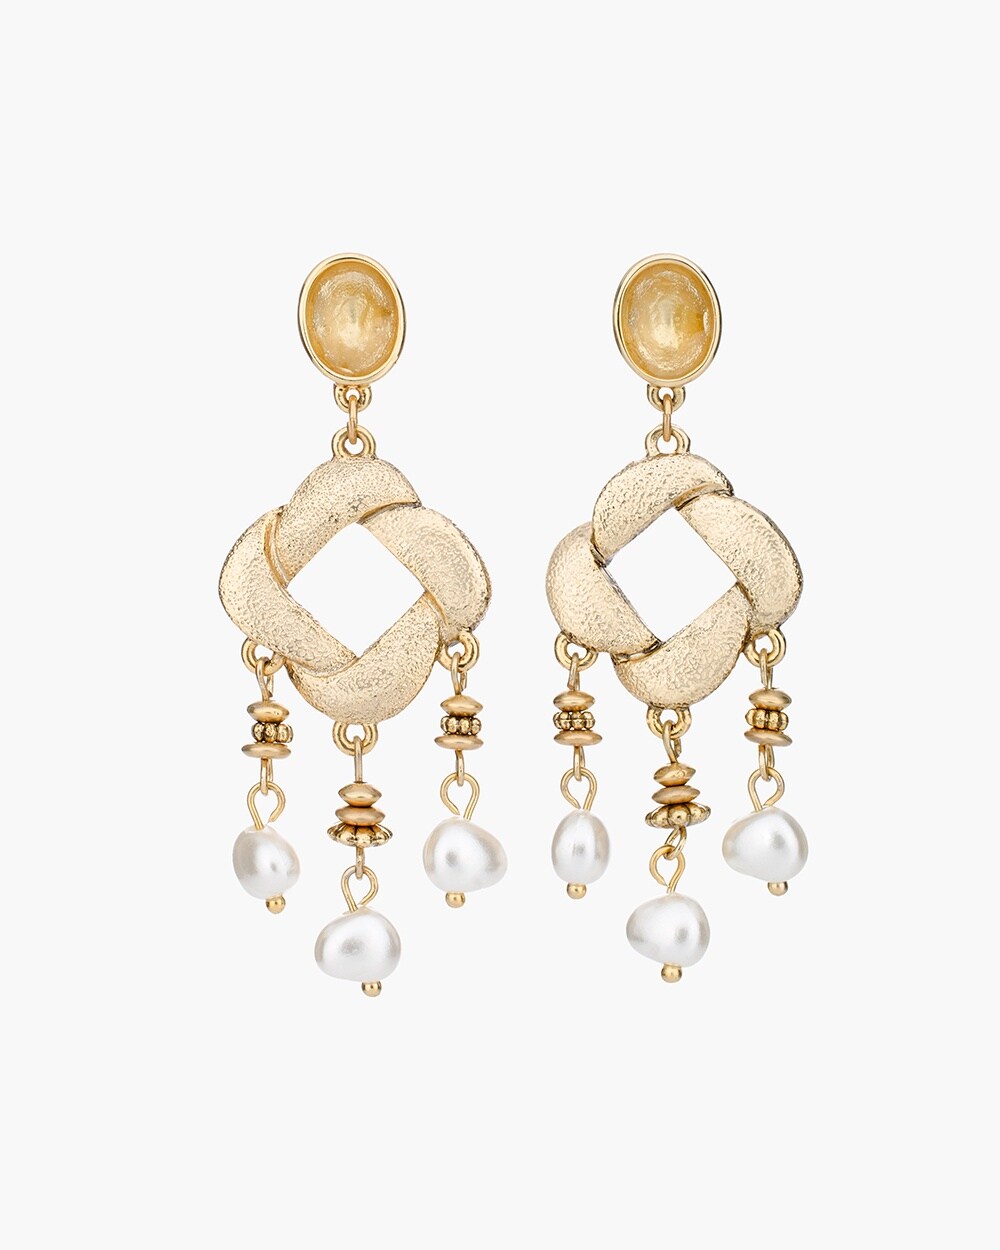 Gold-Tone and Faux-Pearl Chandelier Earrings